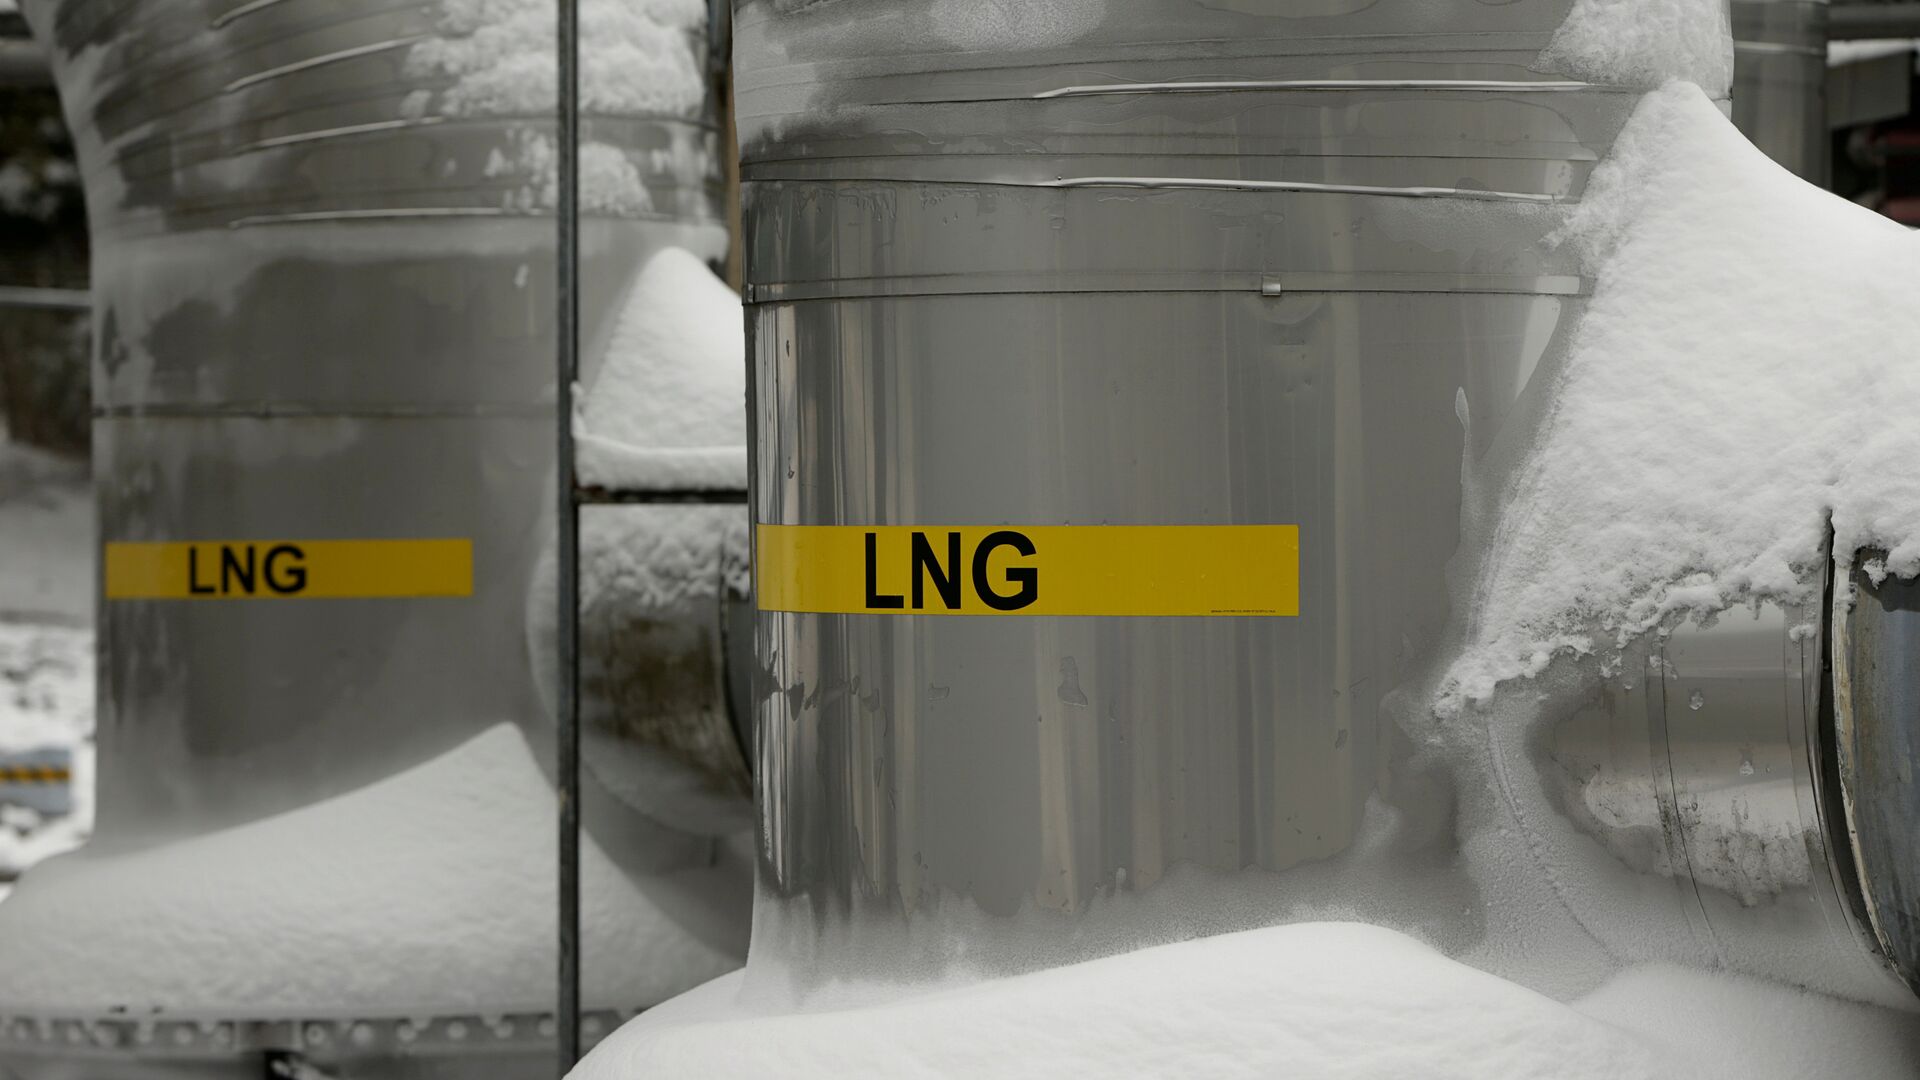 FILE PHOTO: Snow covered transfer lines are seen at the Dominion Cove Point Liquefied Natural Gas (LNG) terminal in Lusby, Maryland March 18, 2014. - Sputnik International, 1920, 03.02.2022